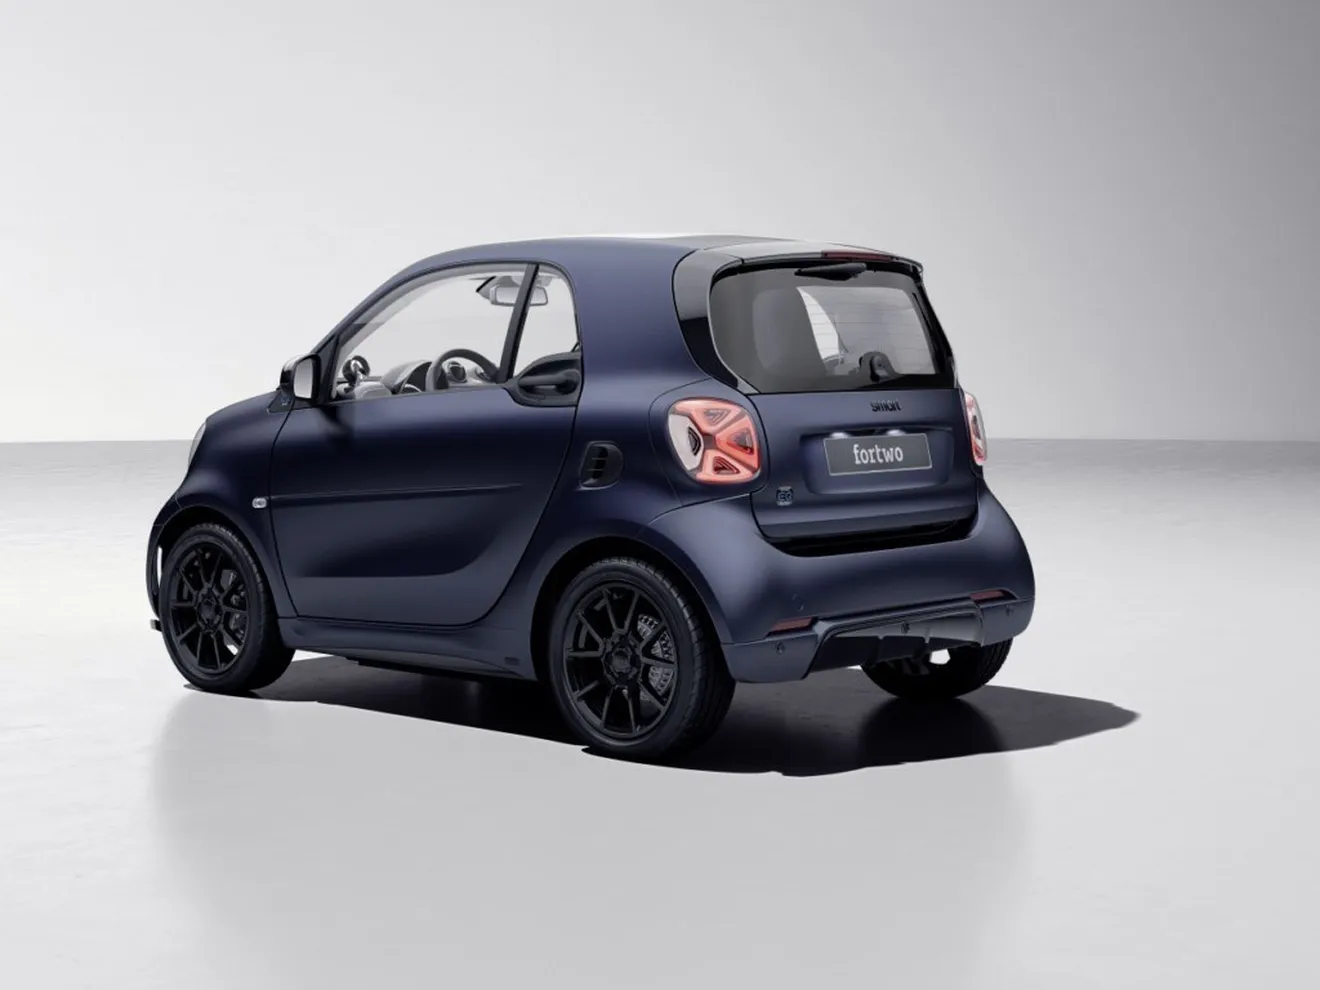 Foto Smart EQ fortwo edition bluedawn - exterior